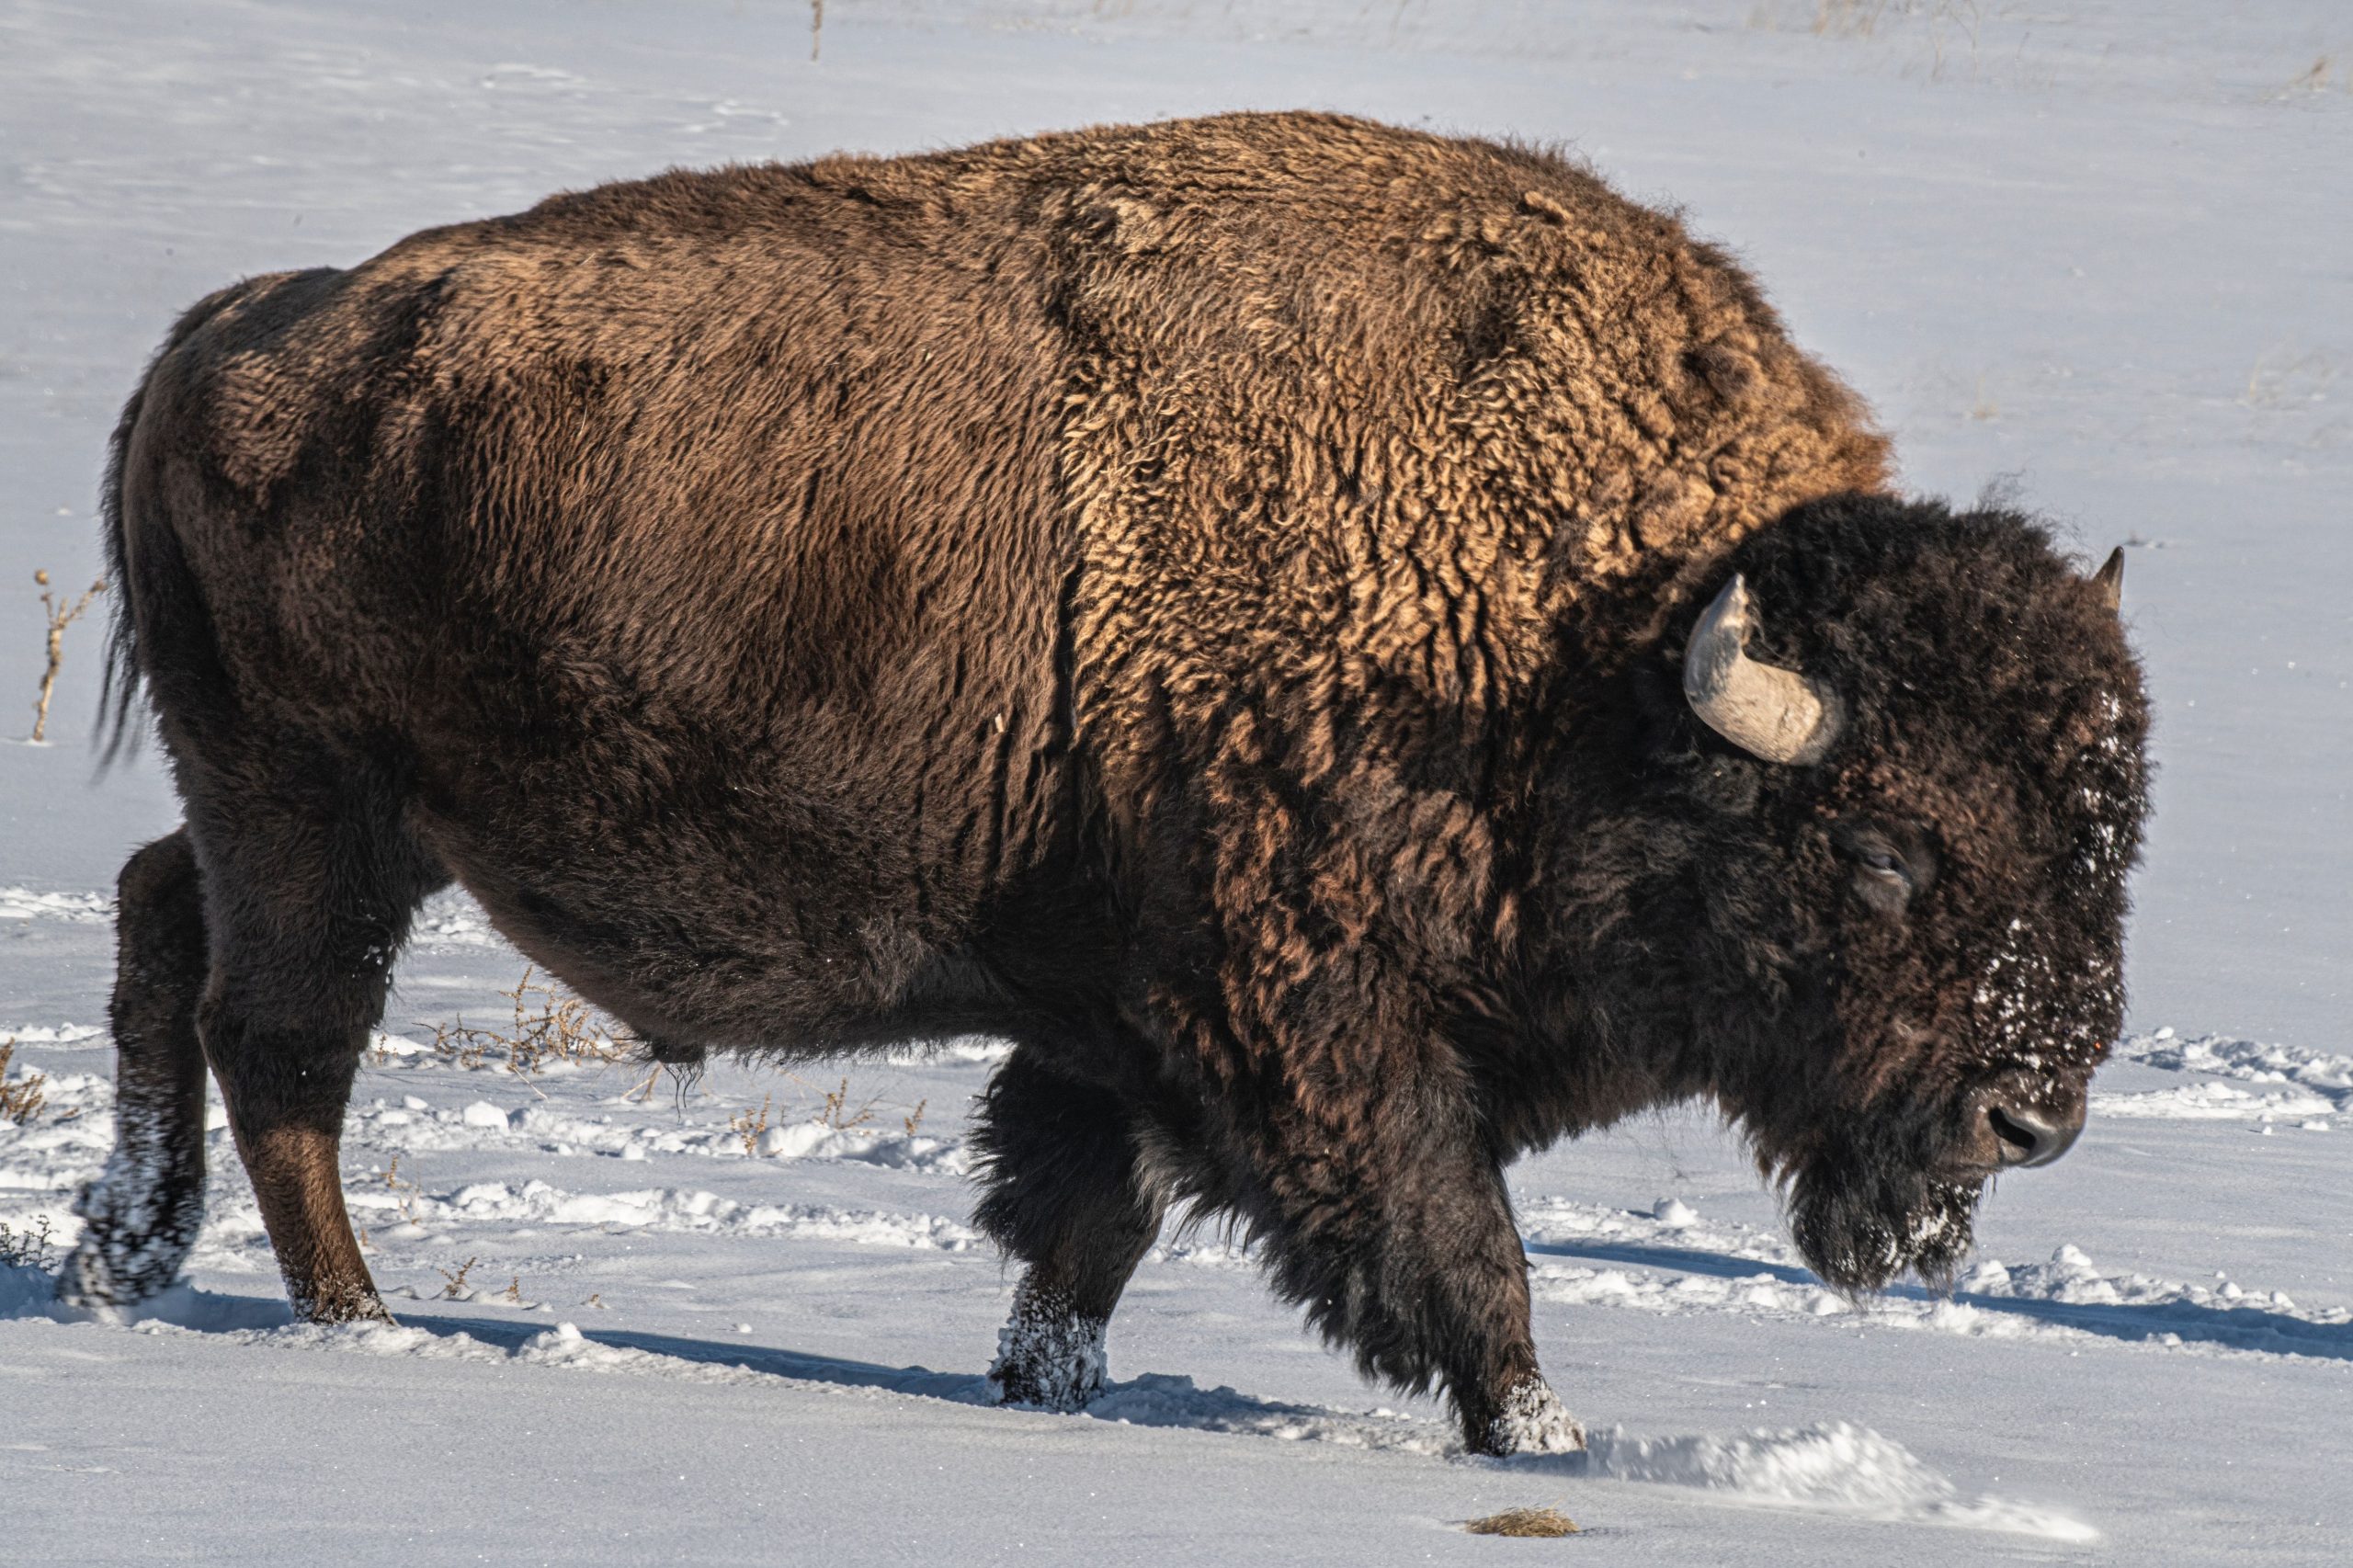 13 bison killed after truck hits herd near Yellowstone National Park